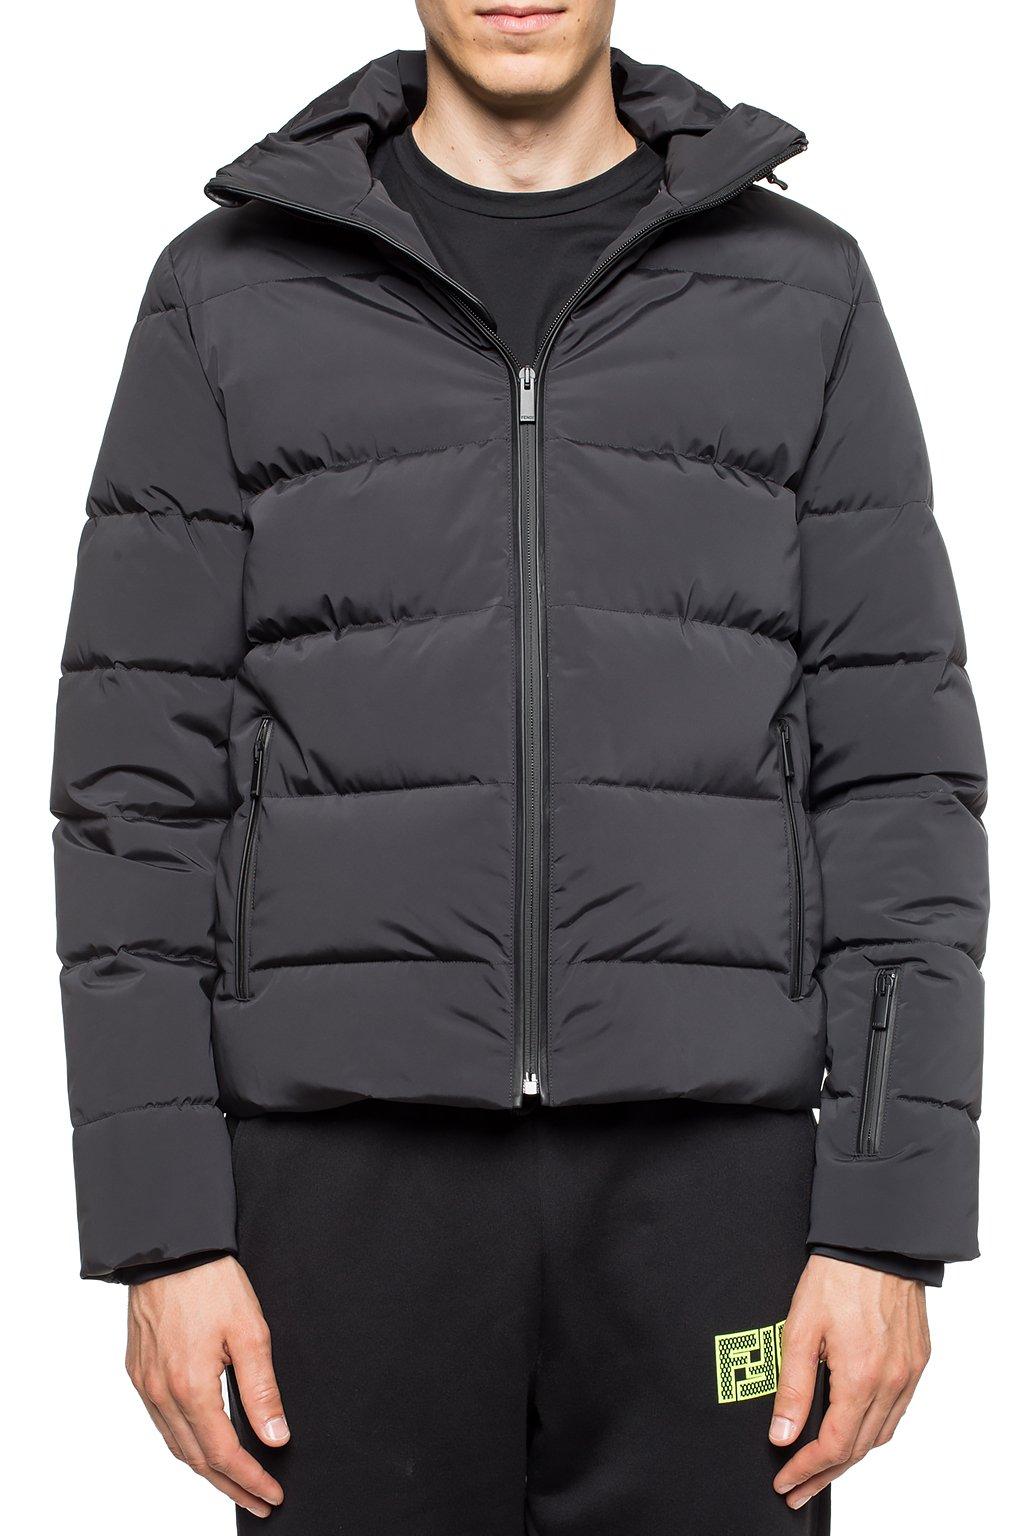 Fendi Synthetic Quilted Down Jacket With Logo in Black for Men - Lyst